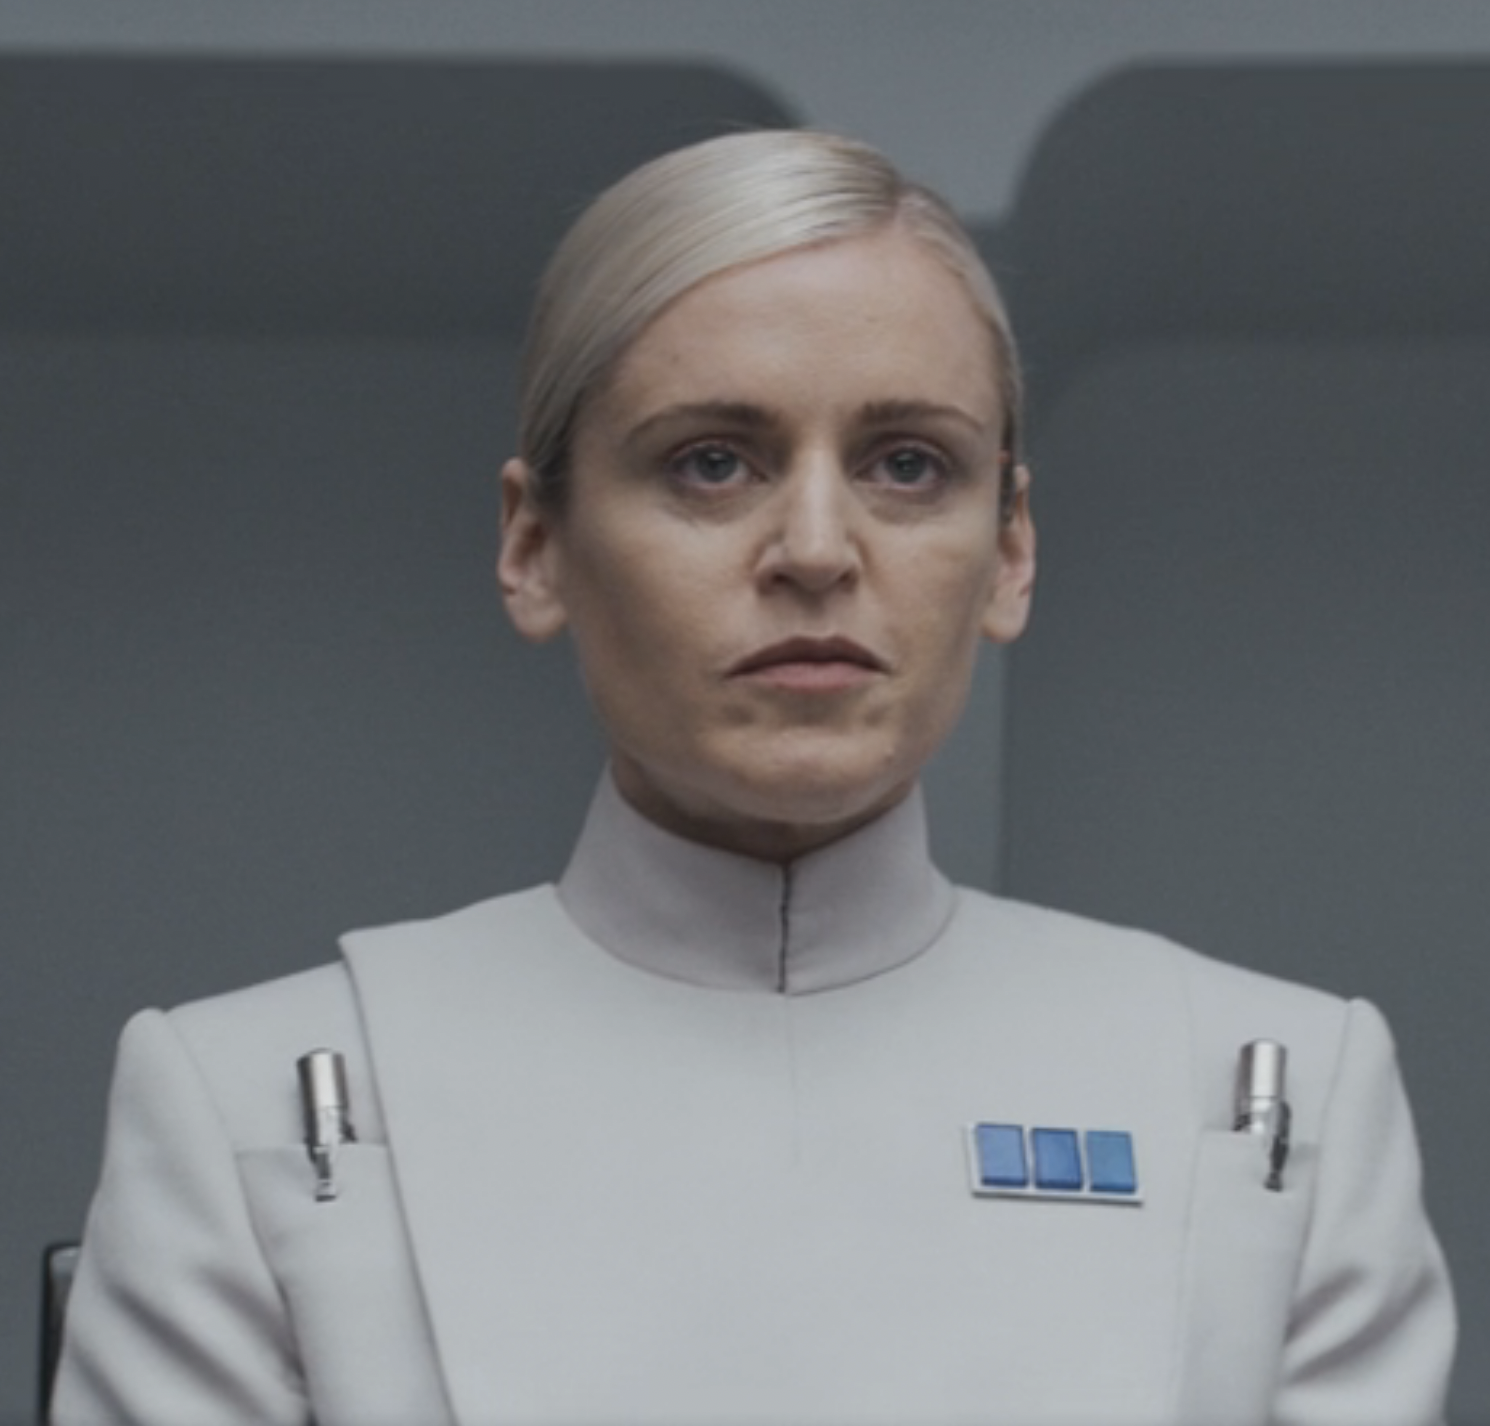 Andor: Stars Denise Gough and Kyle Soller on Their Star Wars Characters –  The Hollywood Reporter